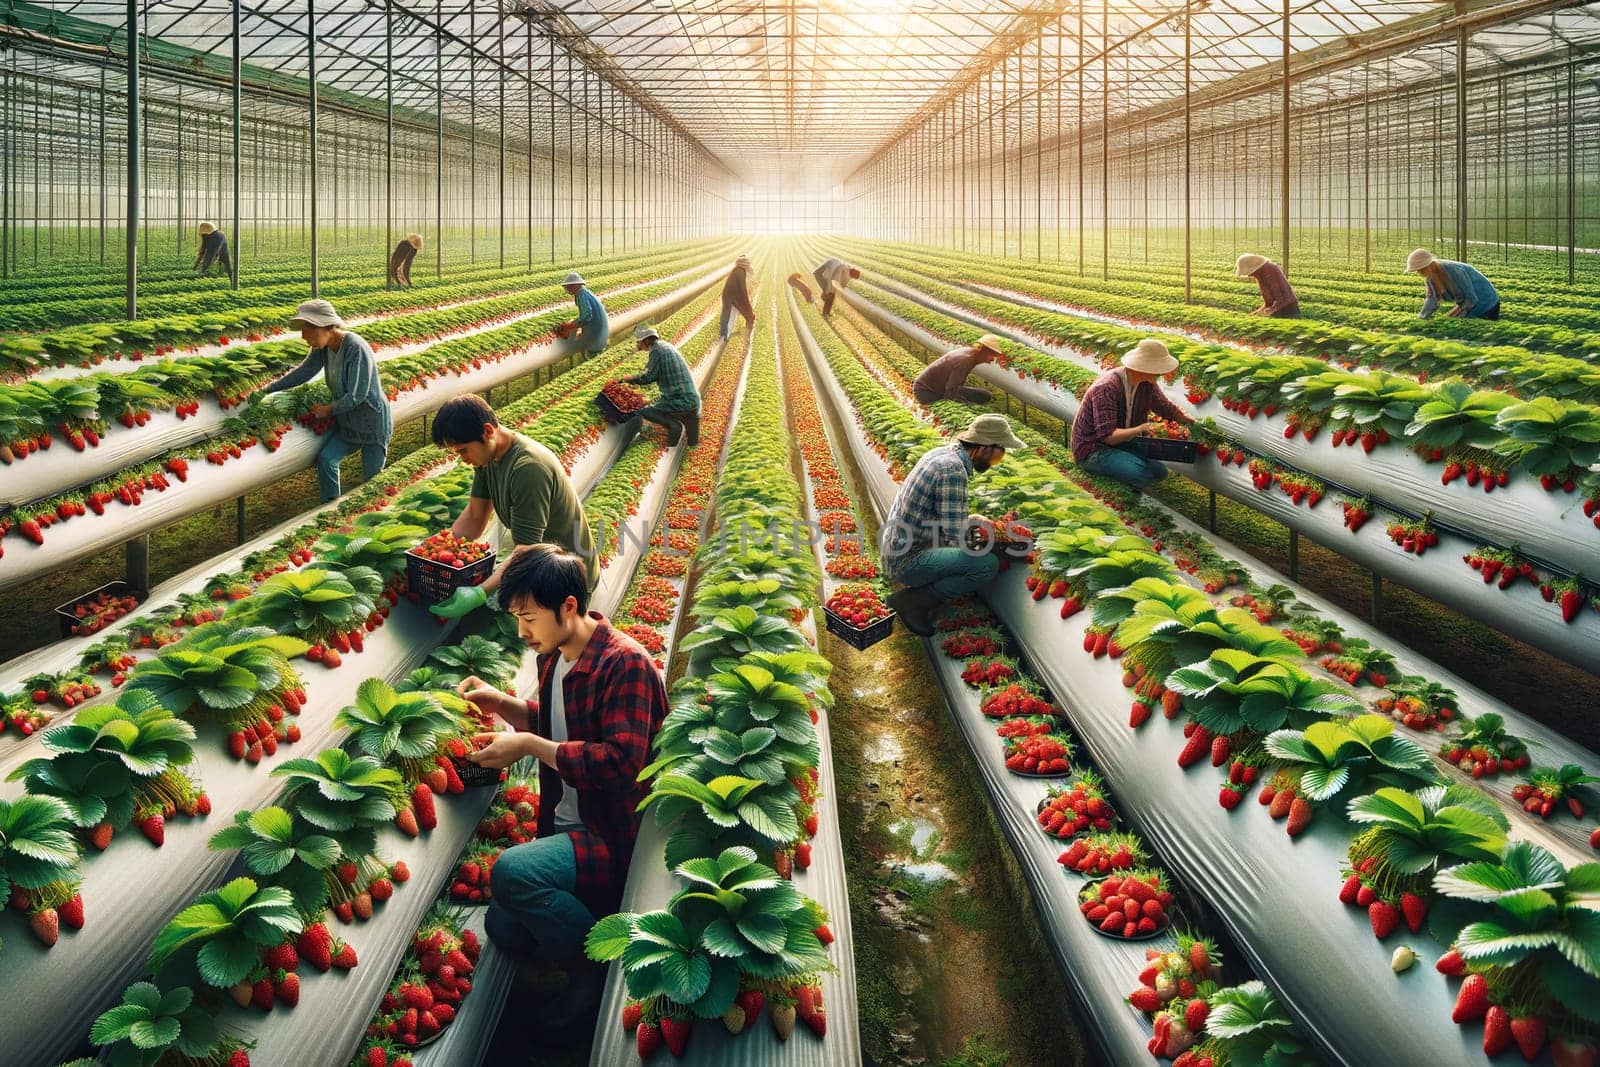 workers picking strawberries in a greenhouse.